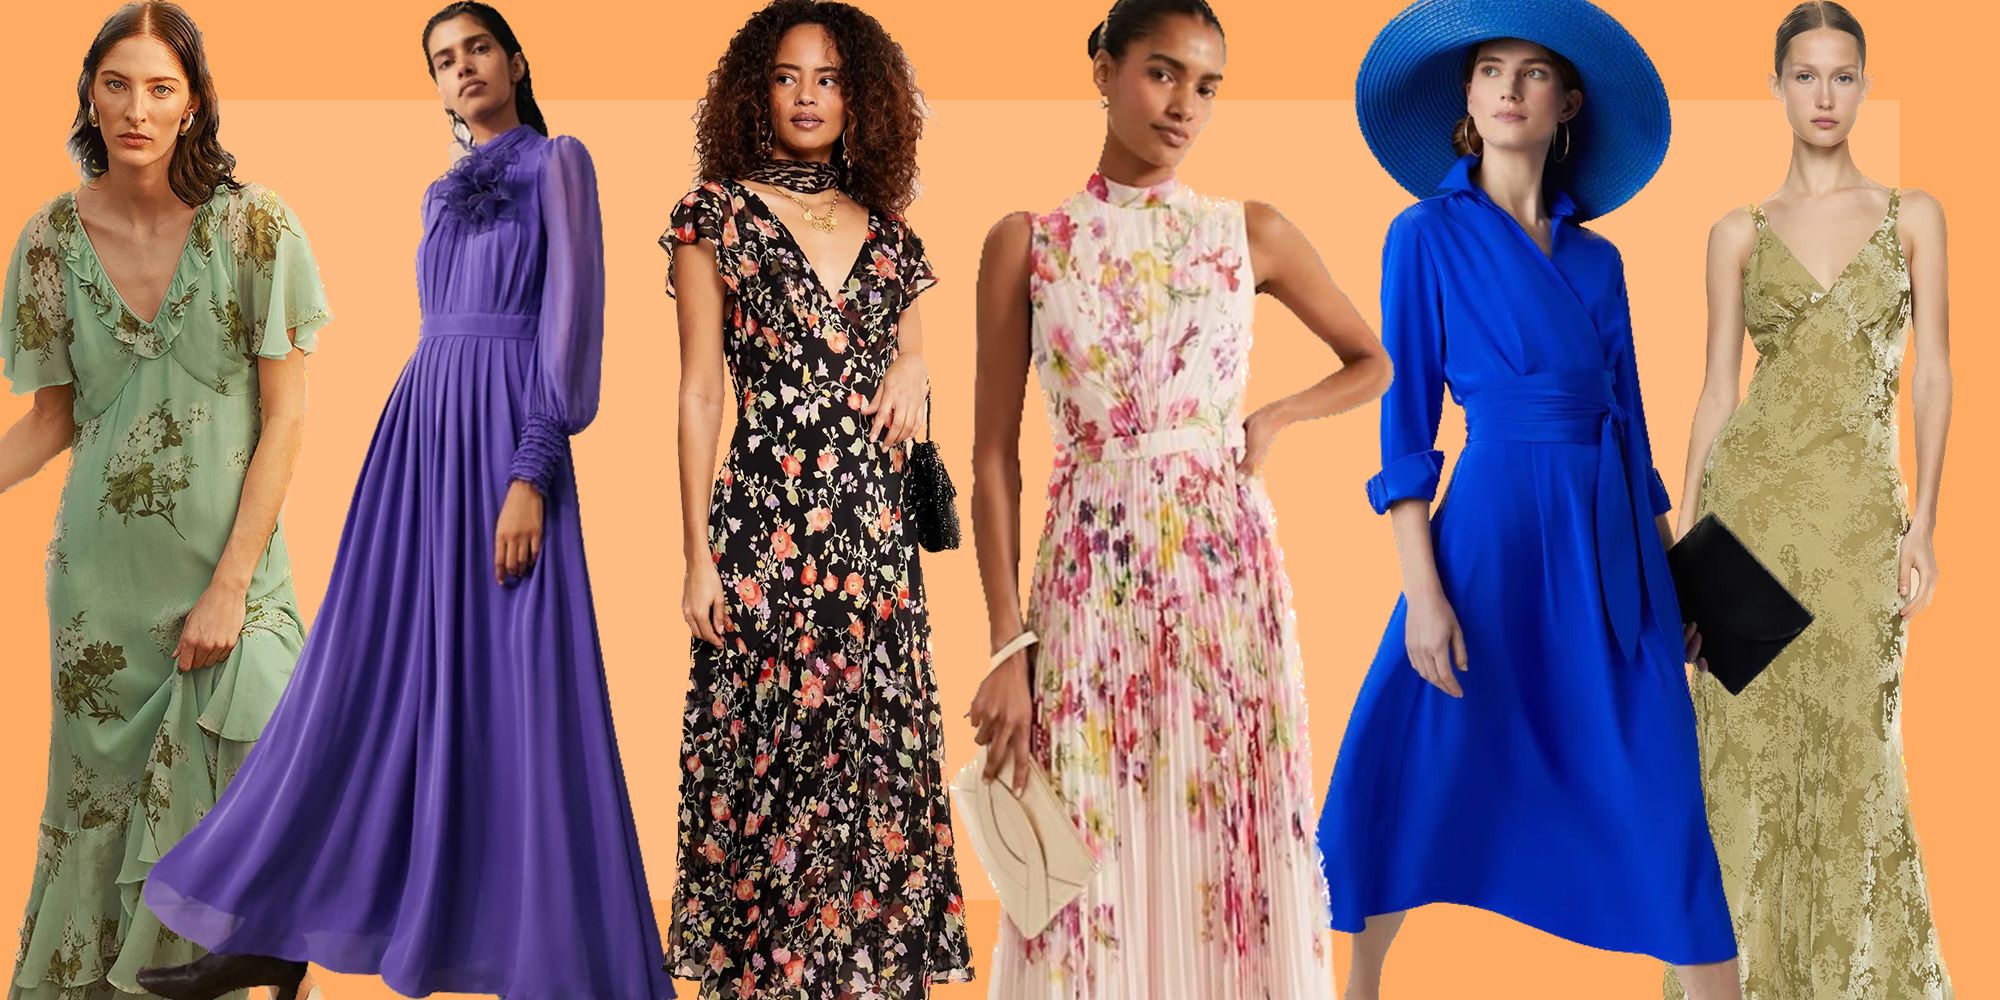 Be the belle of the ball with one of these spring wedding guest dresses